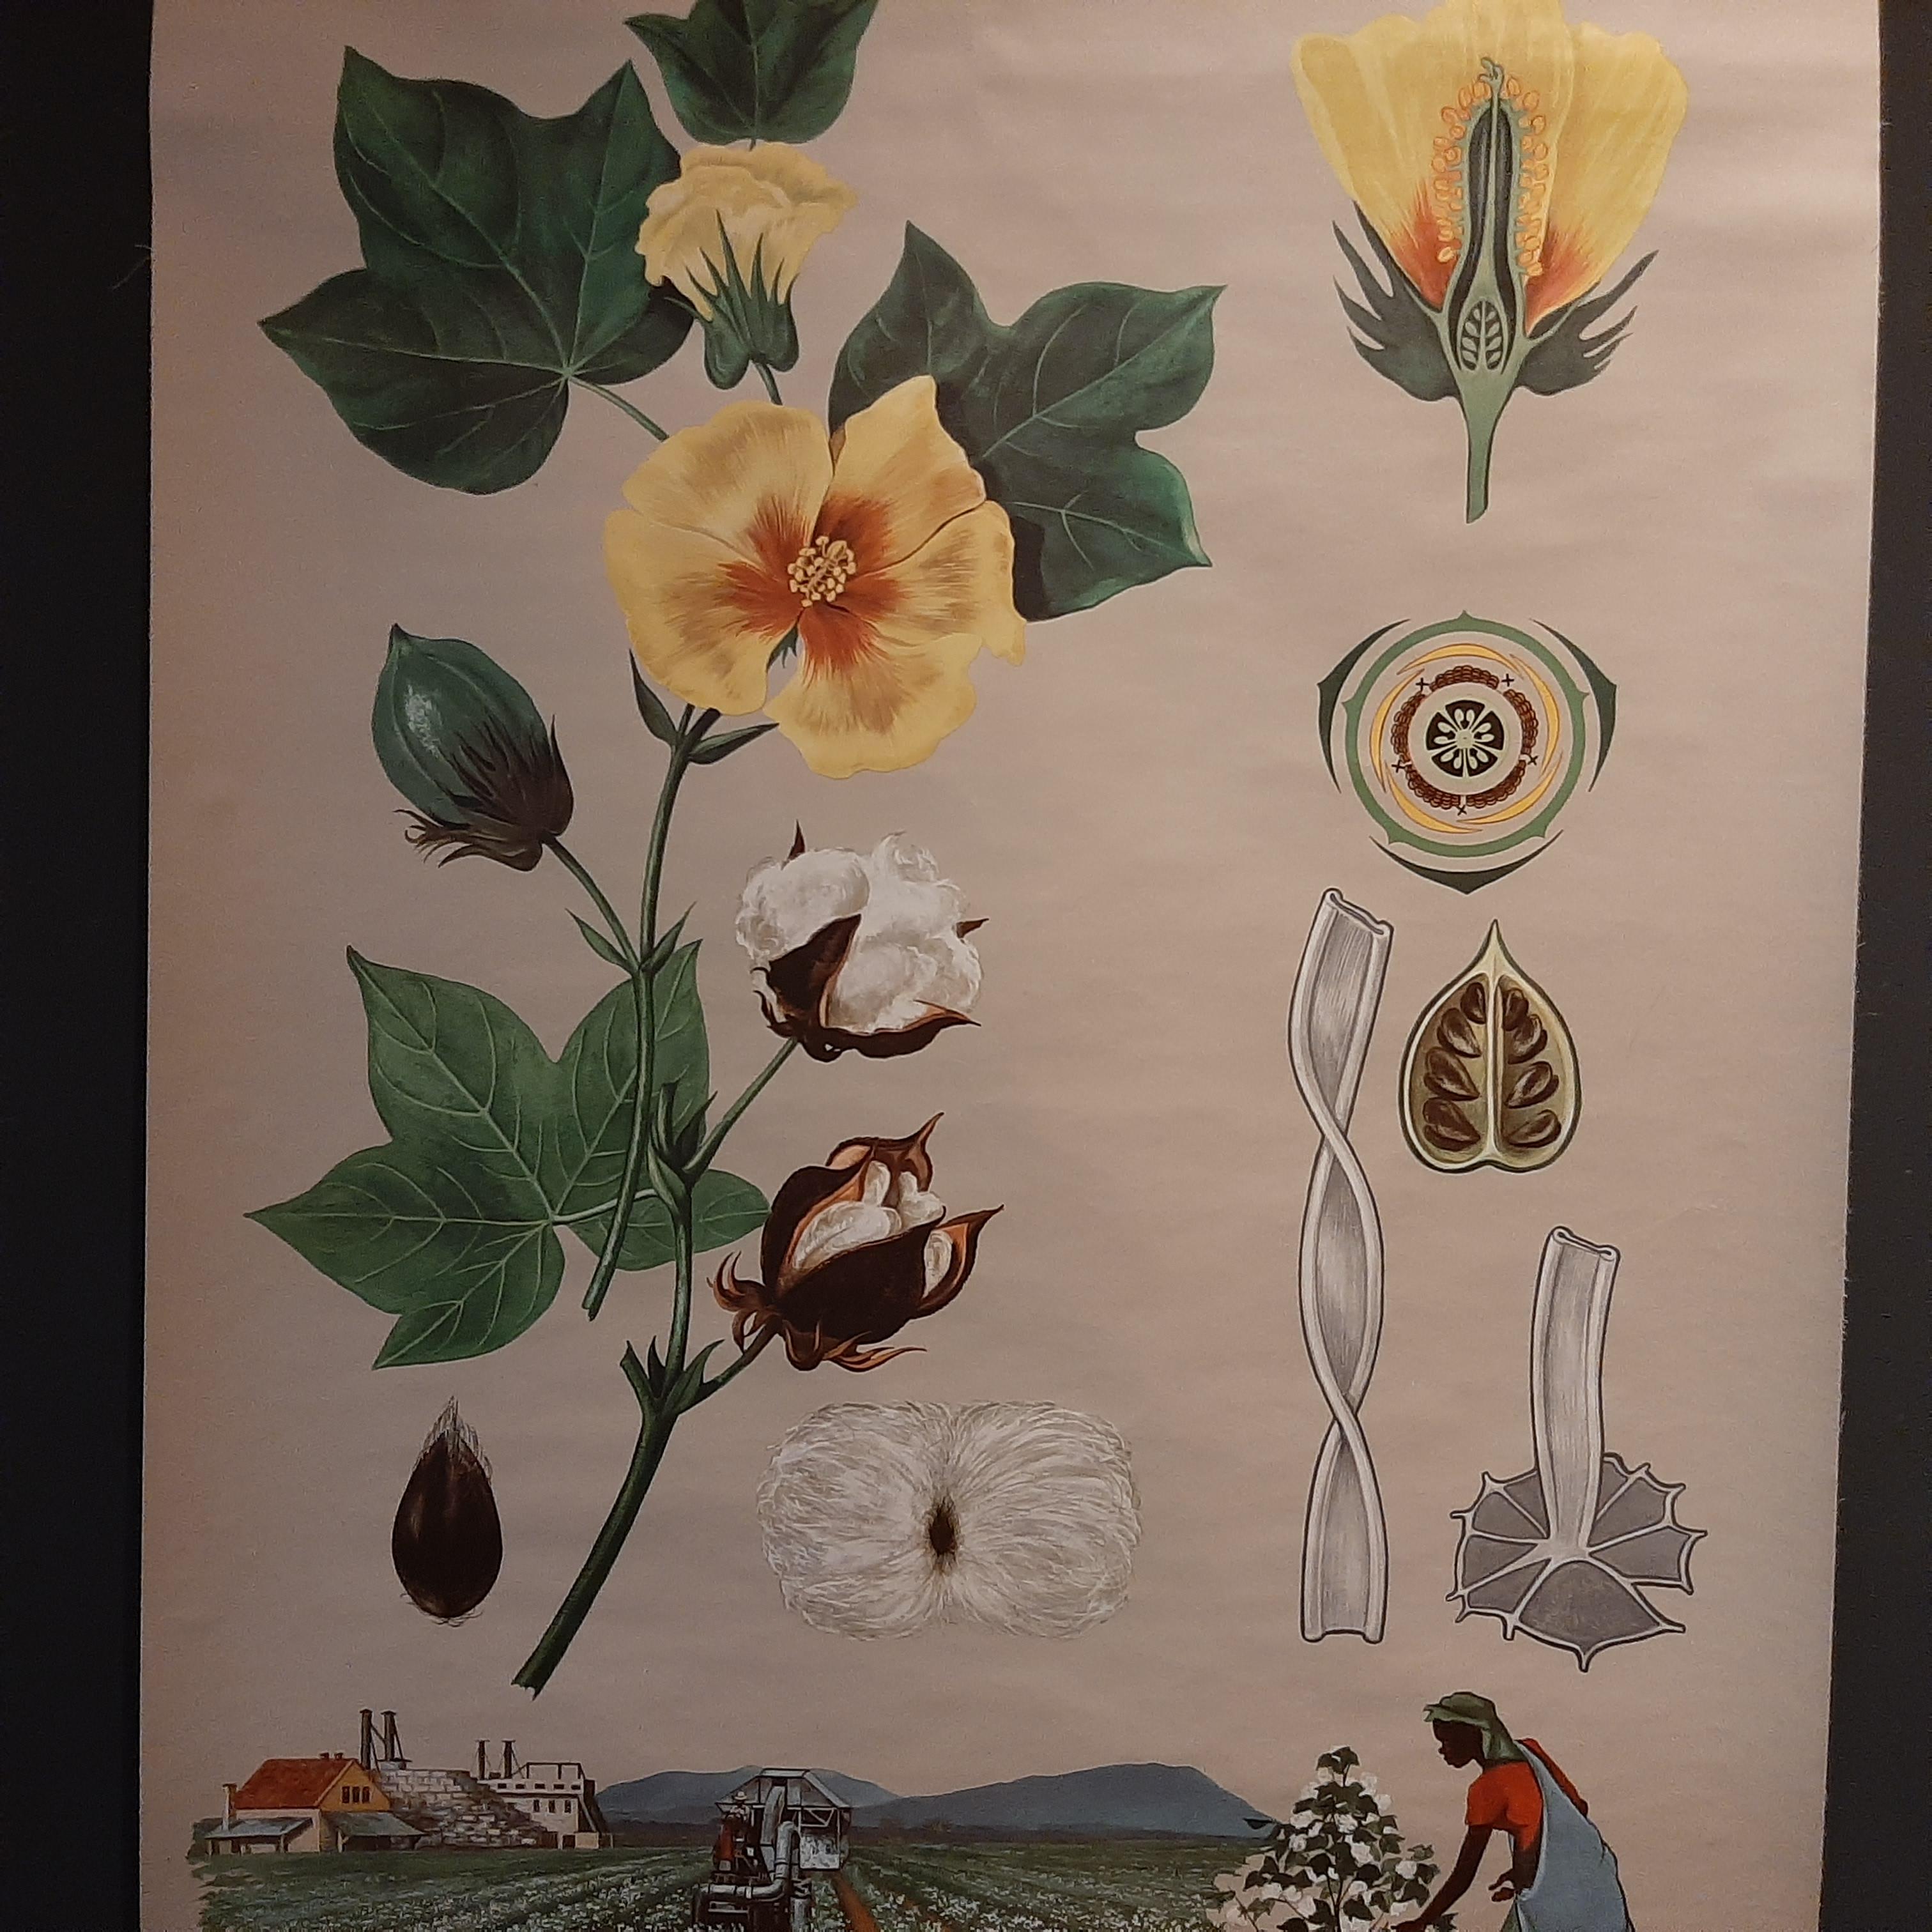 The vintage botany wall chart of a cotton plant and cotton cultivation by Jung, Koch, and Quentell, published around 1960, is an excellent example of educational charts used in the mid-20th century for teaching purposes. 

Here's an overview based